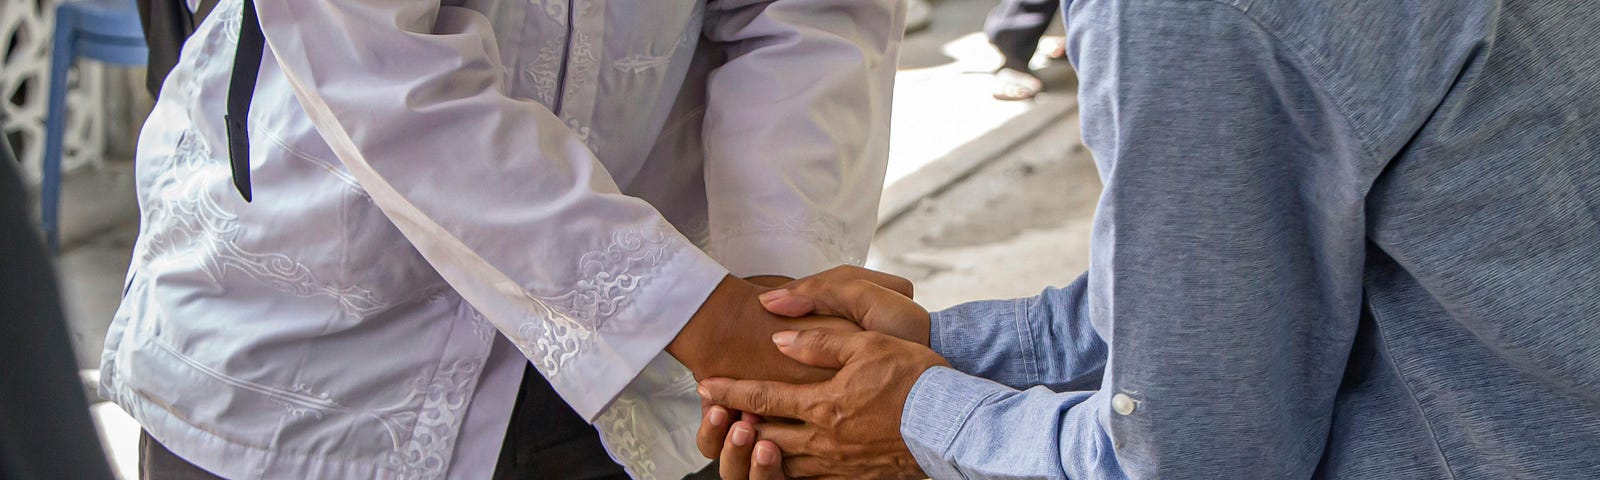 close-up of two people greeting each other with their hands